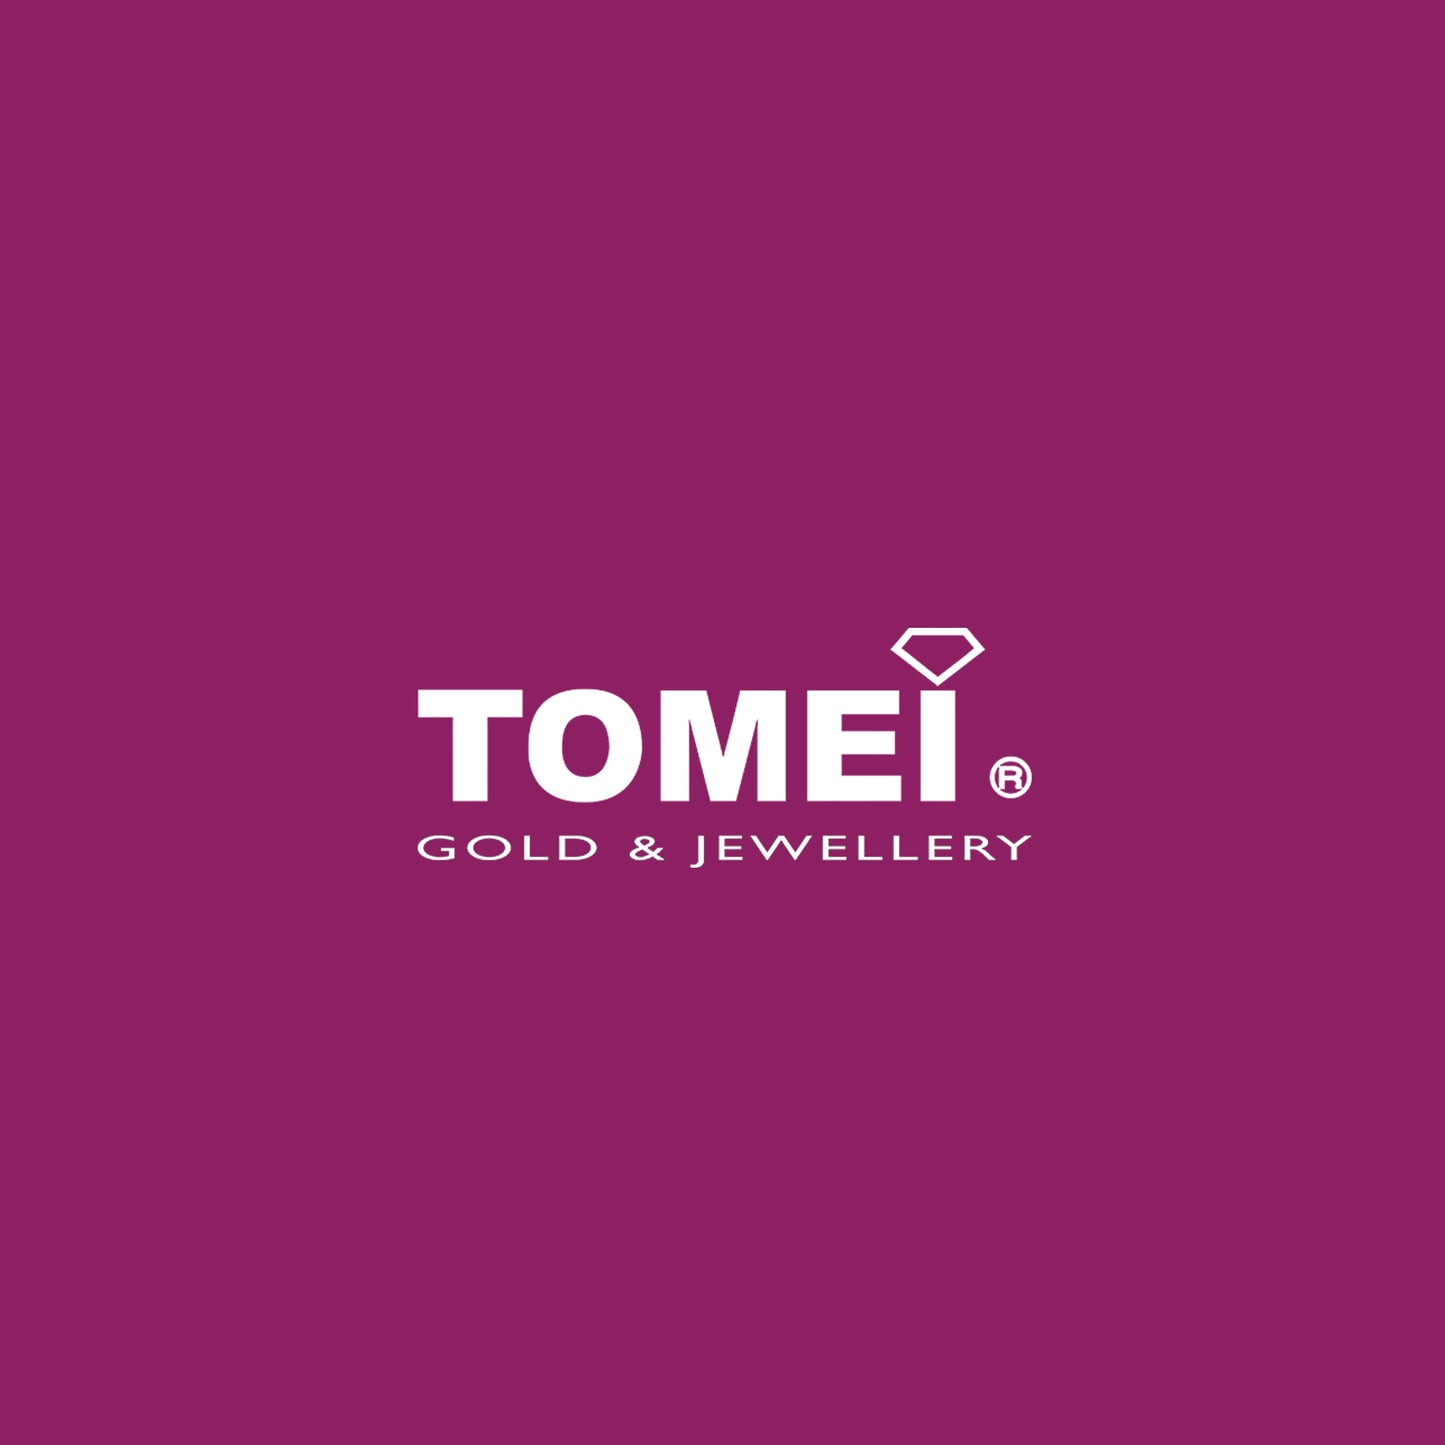 TOMEI Key with Timeless Vibes Pendant, Yellow Gold 916